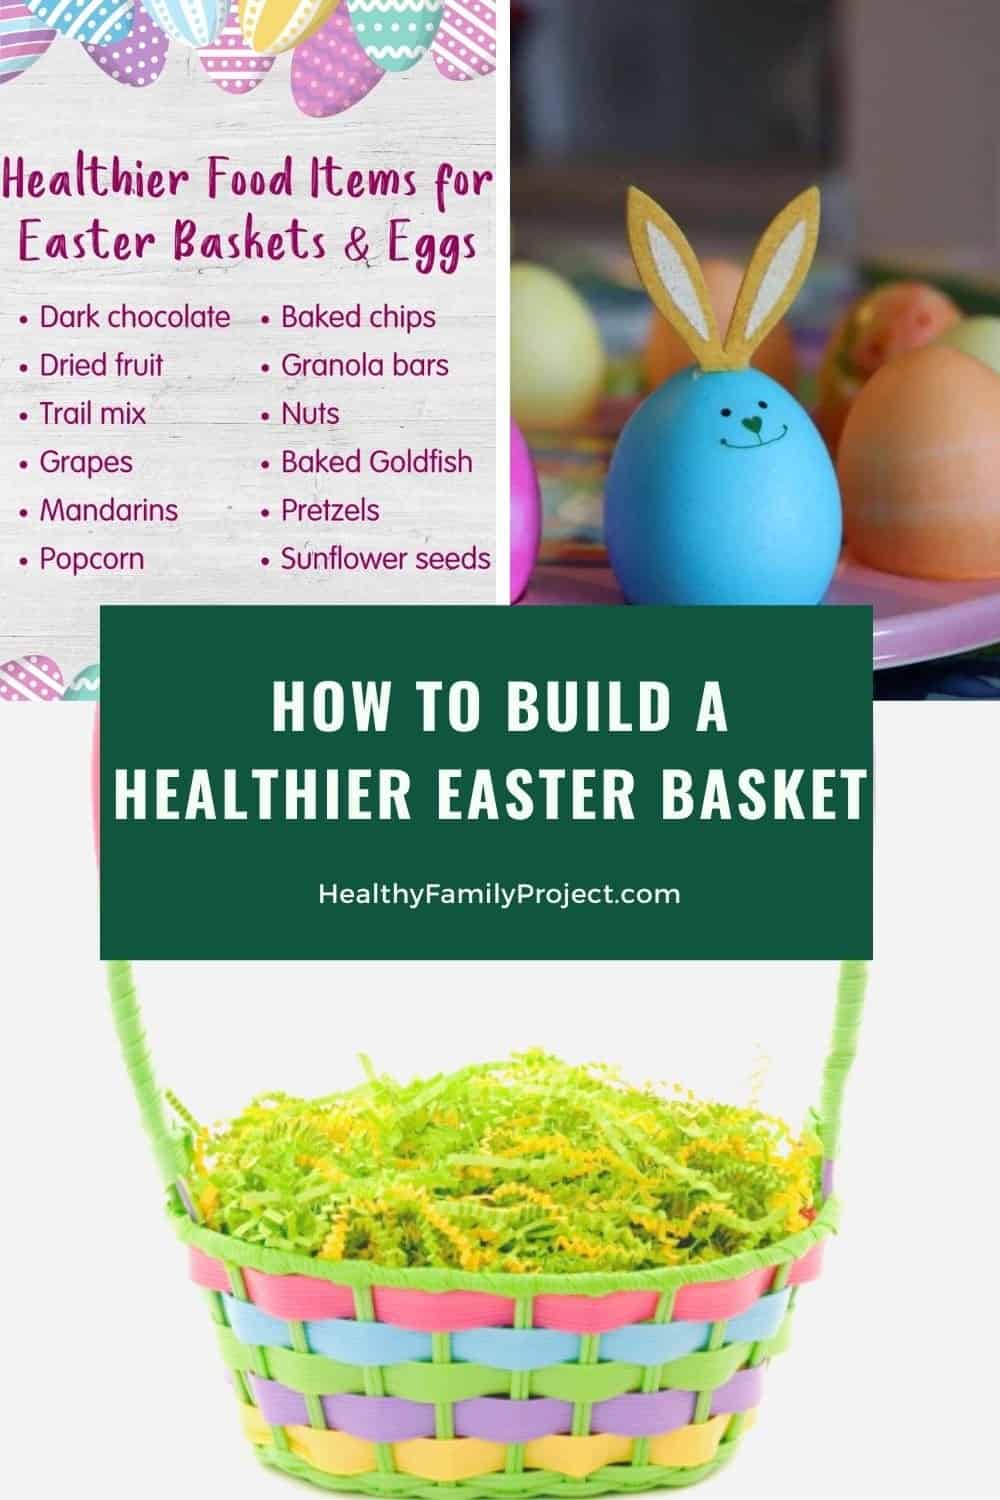 tips on how to build a healthier easter basket